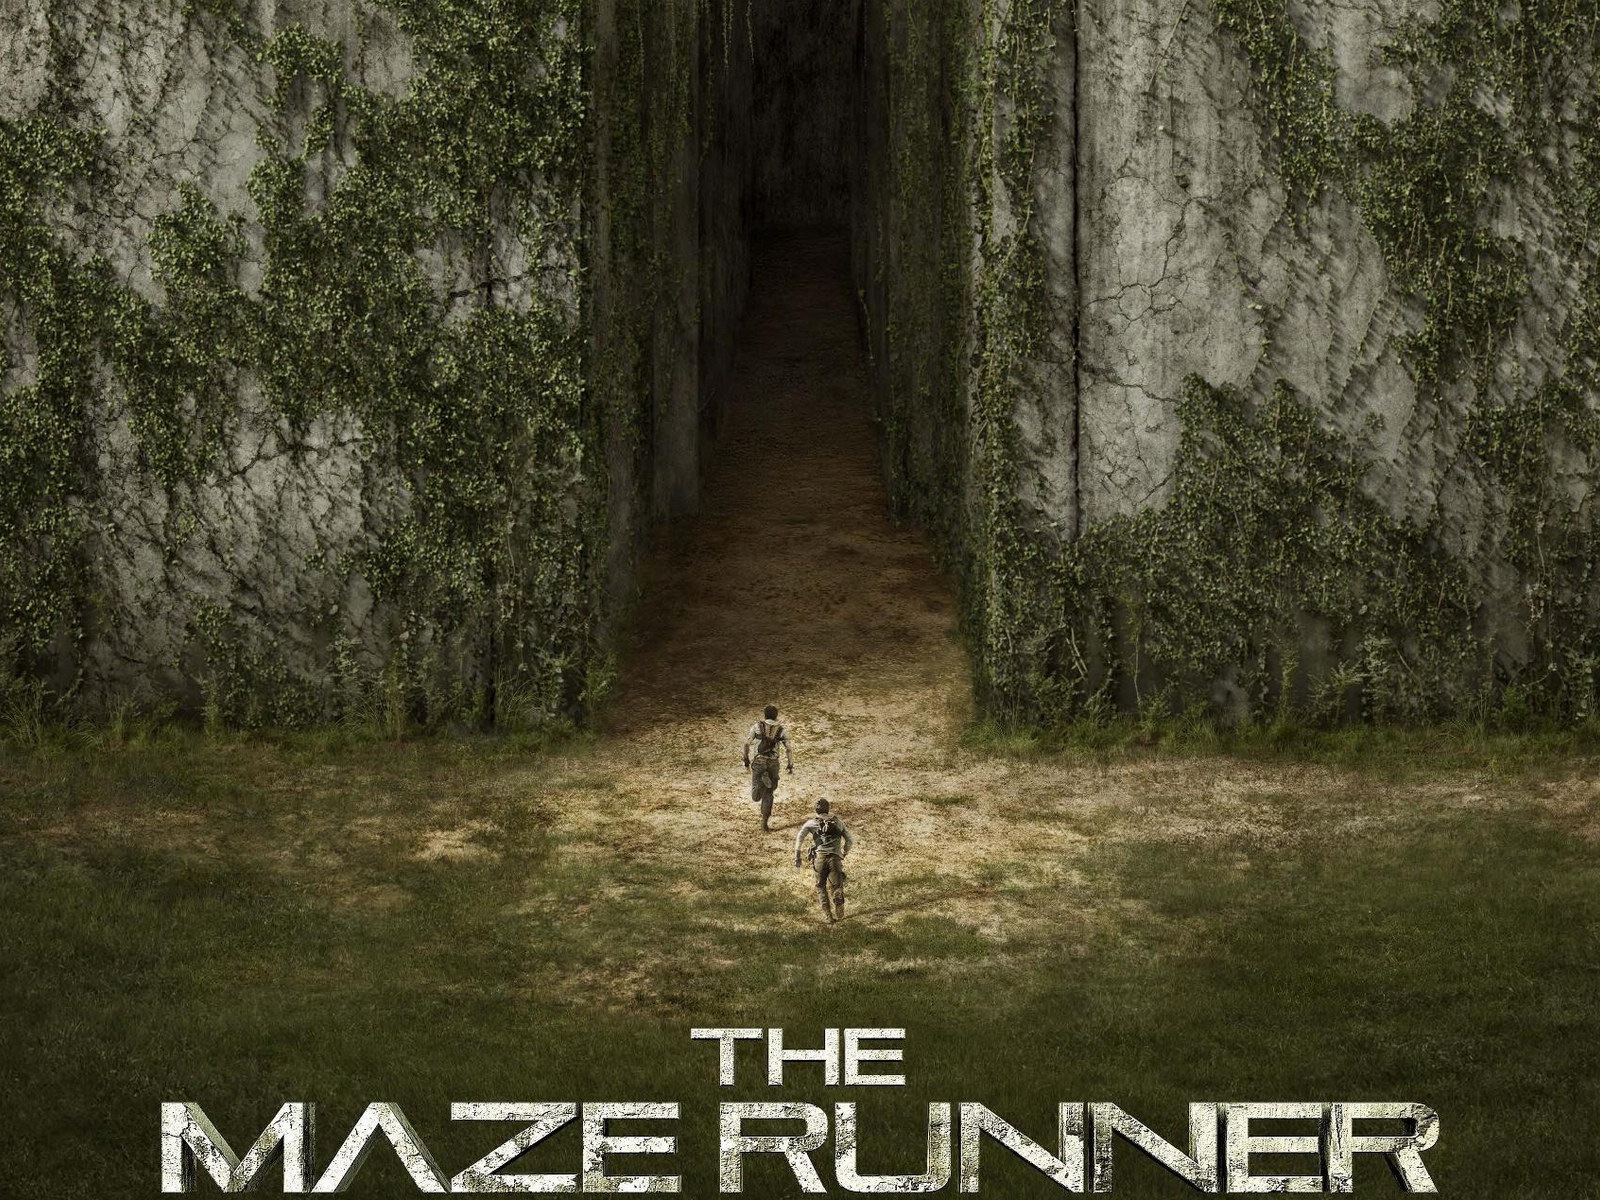 The Maze Runner HD movie wallpapers #5 - 1600x1200